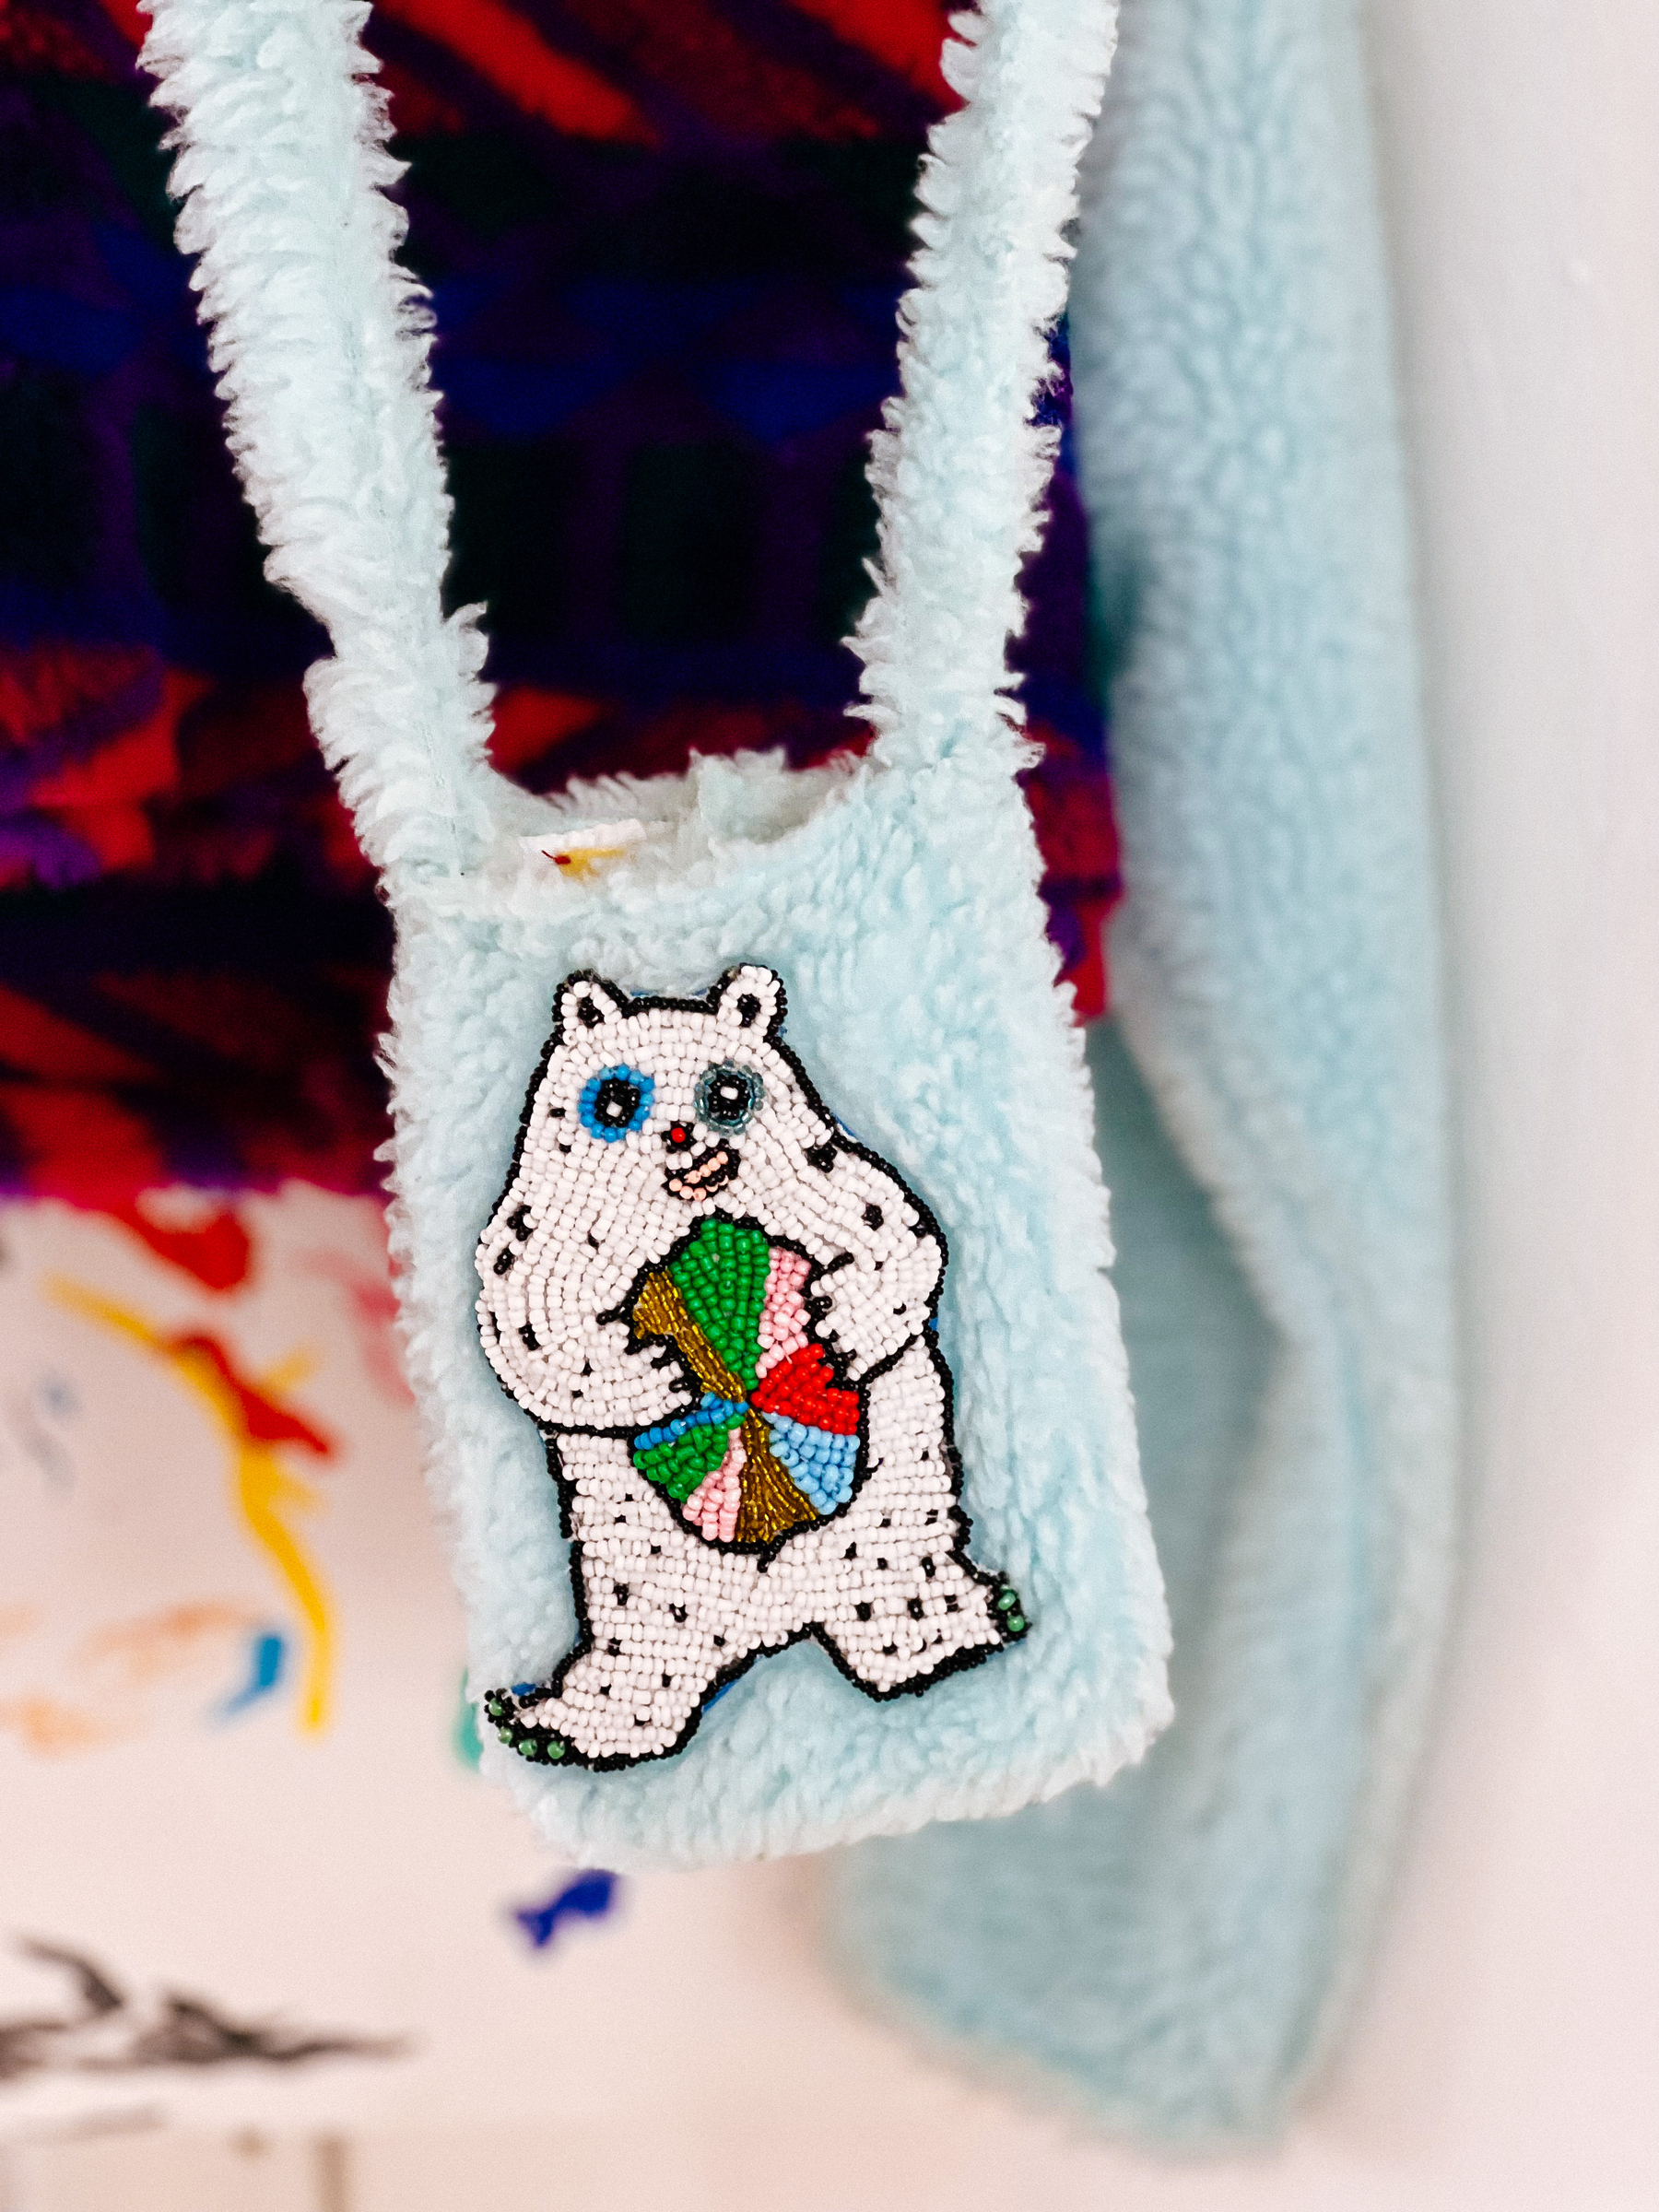 A purse with a white bear holding a colored ball